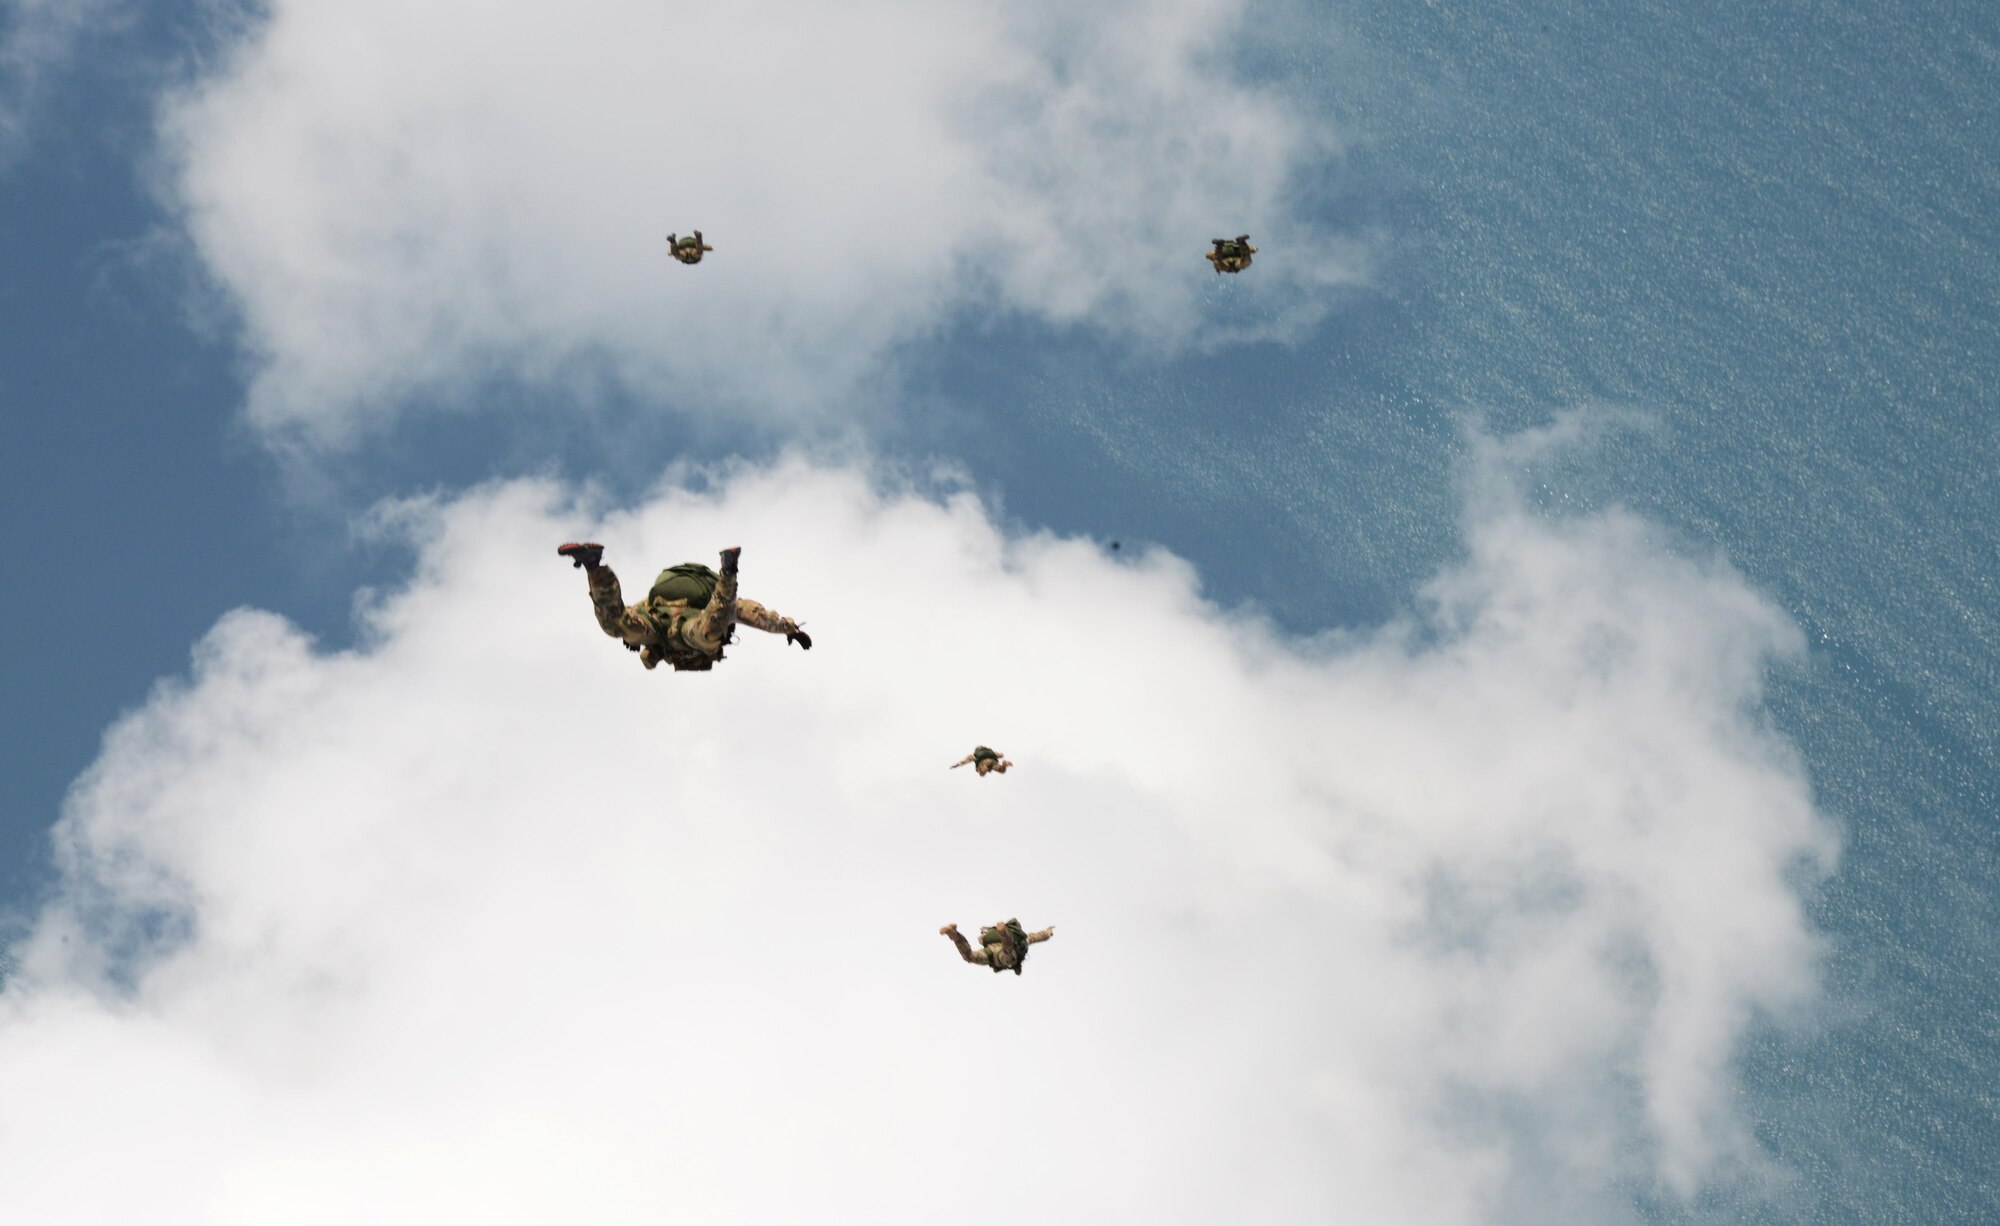 Special Tactics Airmen from the 320th Special Tactics Squadron and the 22nd Special Tactics Squadron jump from an MC-130J Commando II near Kuantan, Malaysia, June 8, 2015.  The high-altitude low-opening jumps were conducted as part of Exercise Teak Mint, a multinational and bilateral exercise between the Royal Malaysian Air Force and the U.S. Air Force.  (U.S. Air Force photo by Tech. Sgt. Kristine Dreyer)  